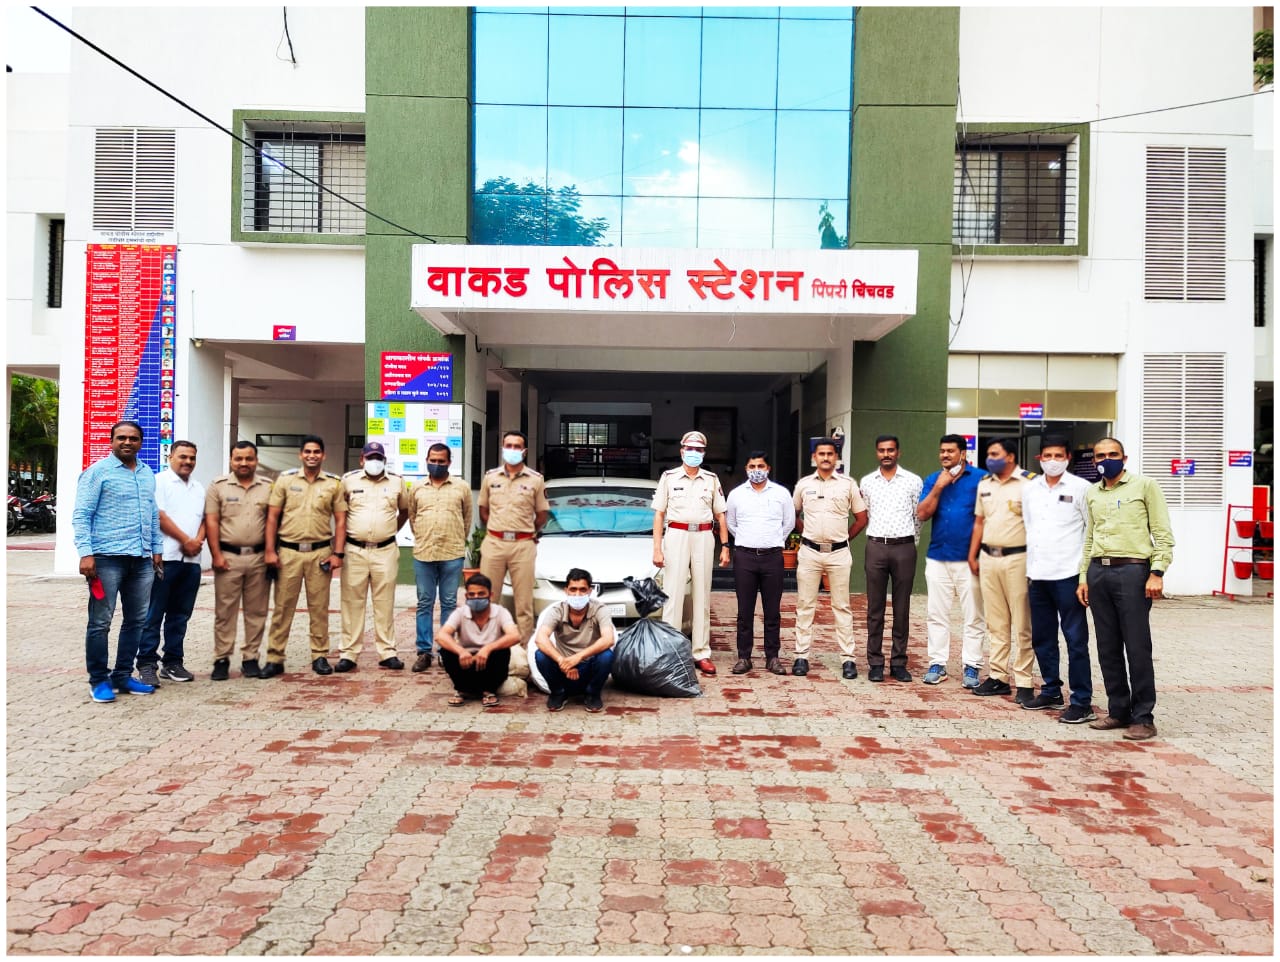 Two arrested in Gutkha transport case in Thergaon; 5 lakh 27 thousand items confiscated